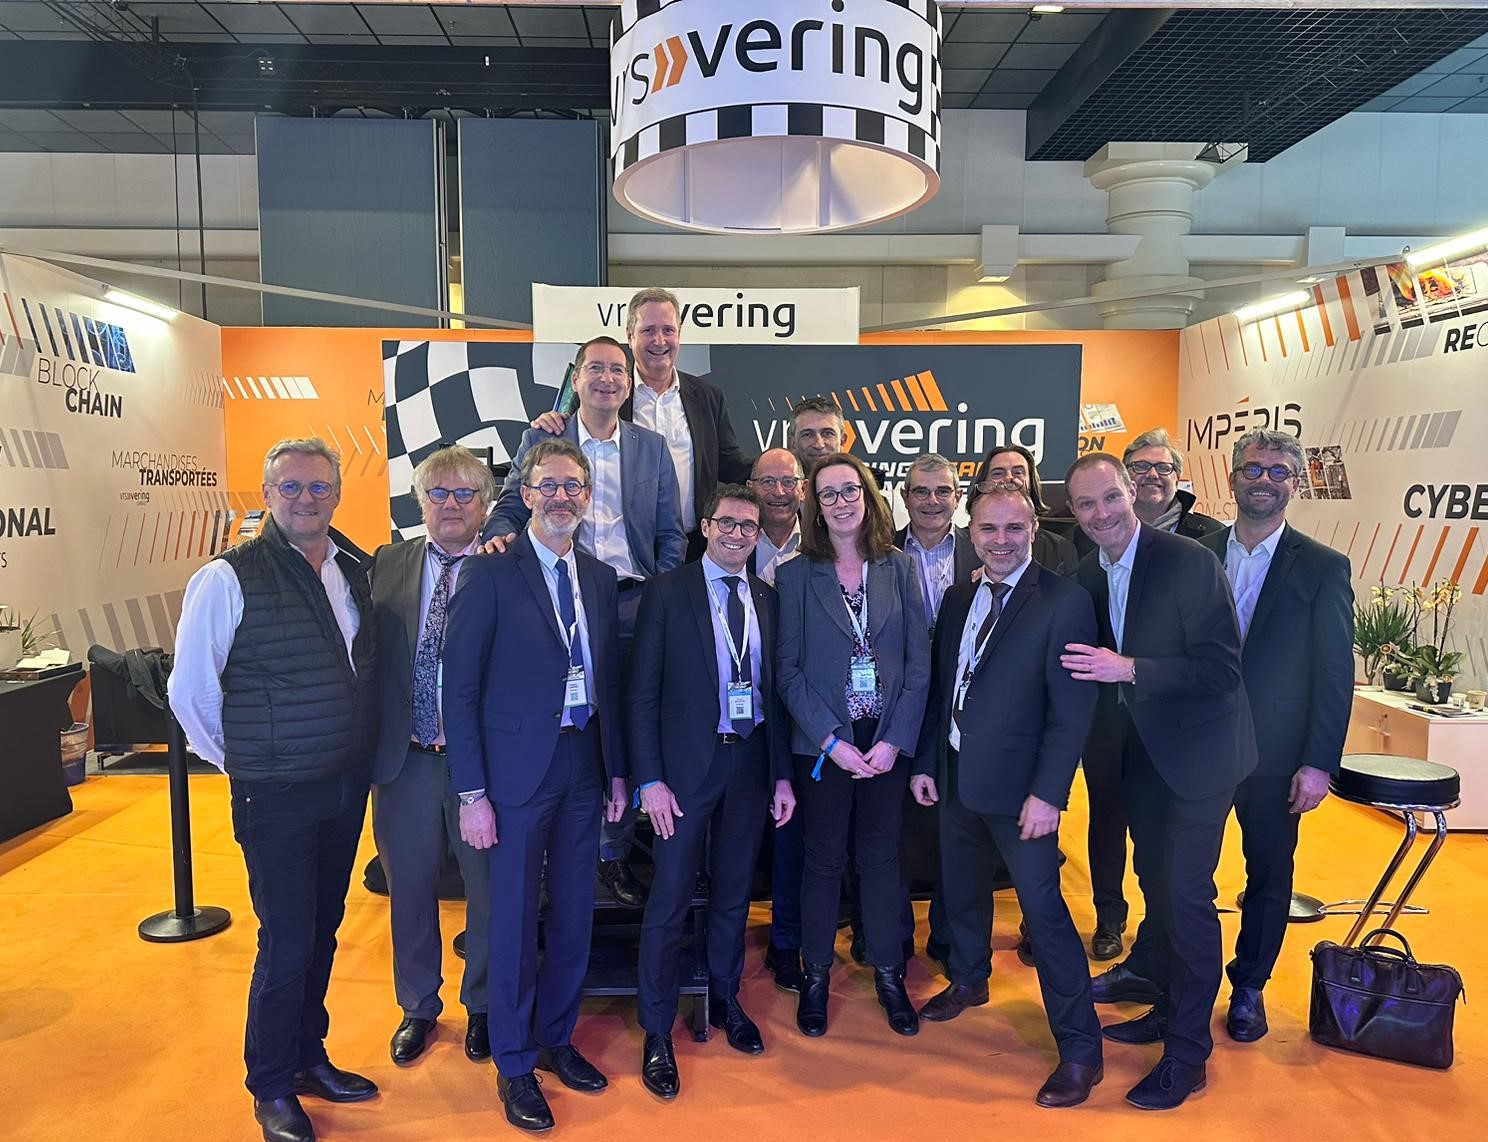 You are currently viewing 👏 The vrs Vering and Impéris teams thank you for visiting their booth in such large numbers.